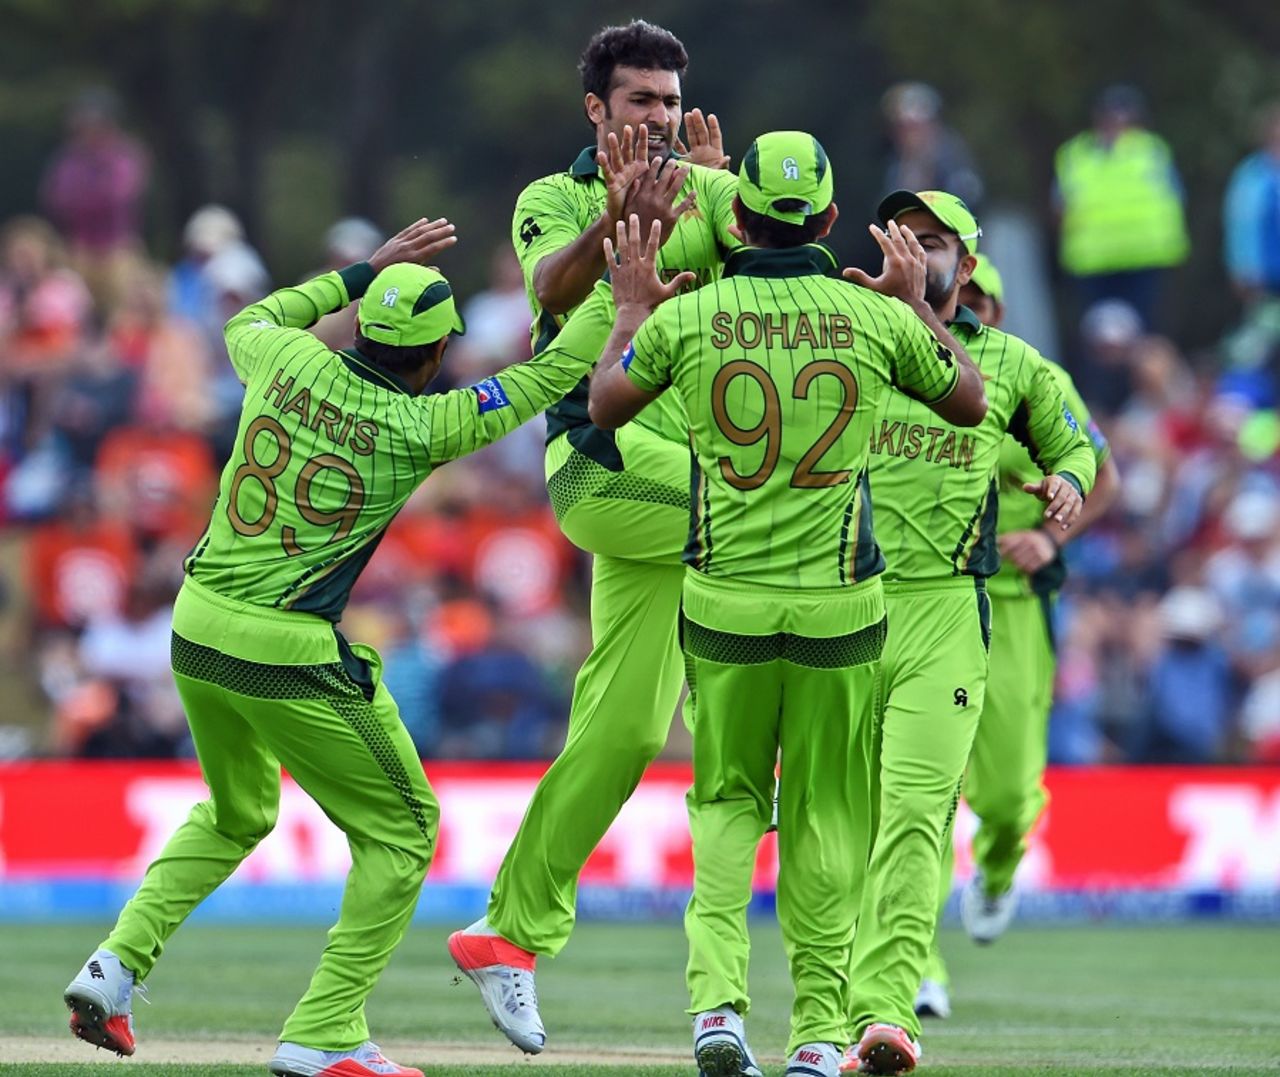 Sohail Khan is mobbed after dismissing Dwayne Smith, Pakistan v West Indies, World Cup 2015, Group B, Christchurch, February 21, 2015